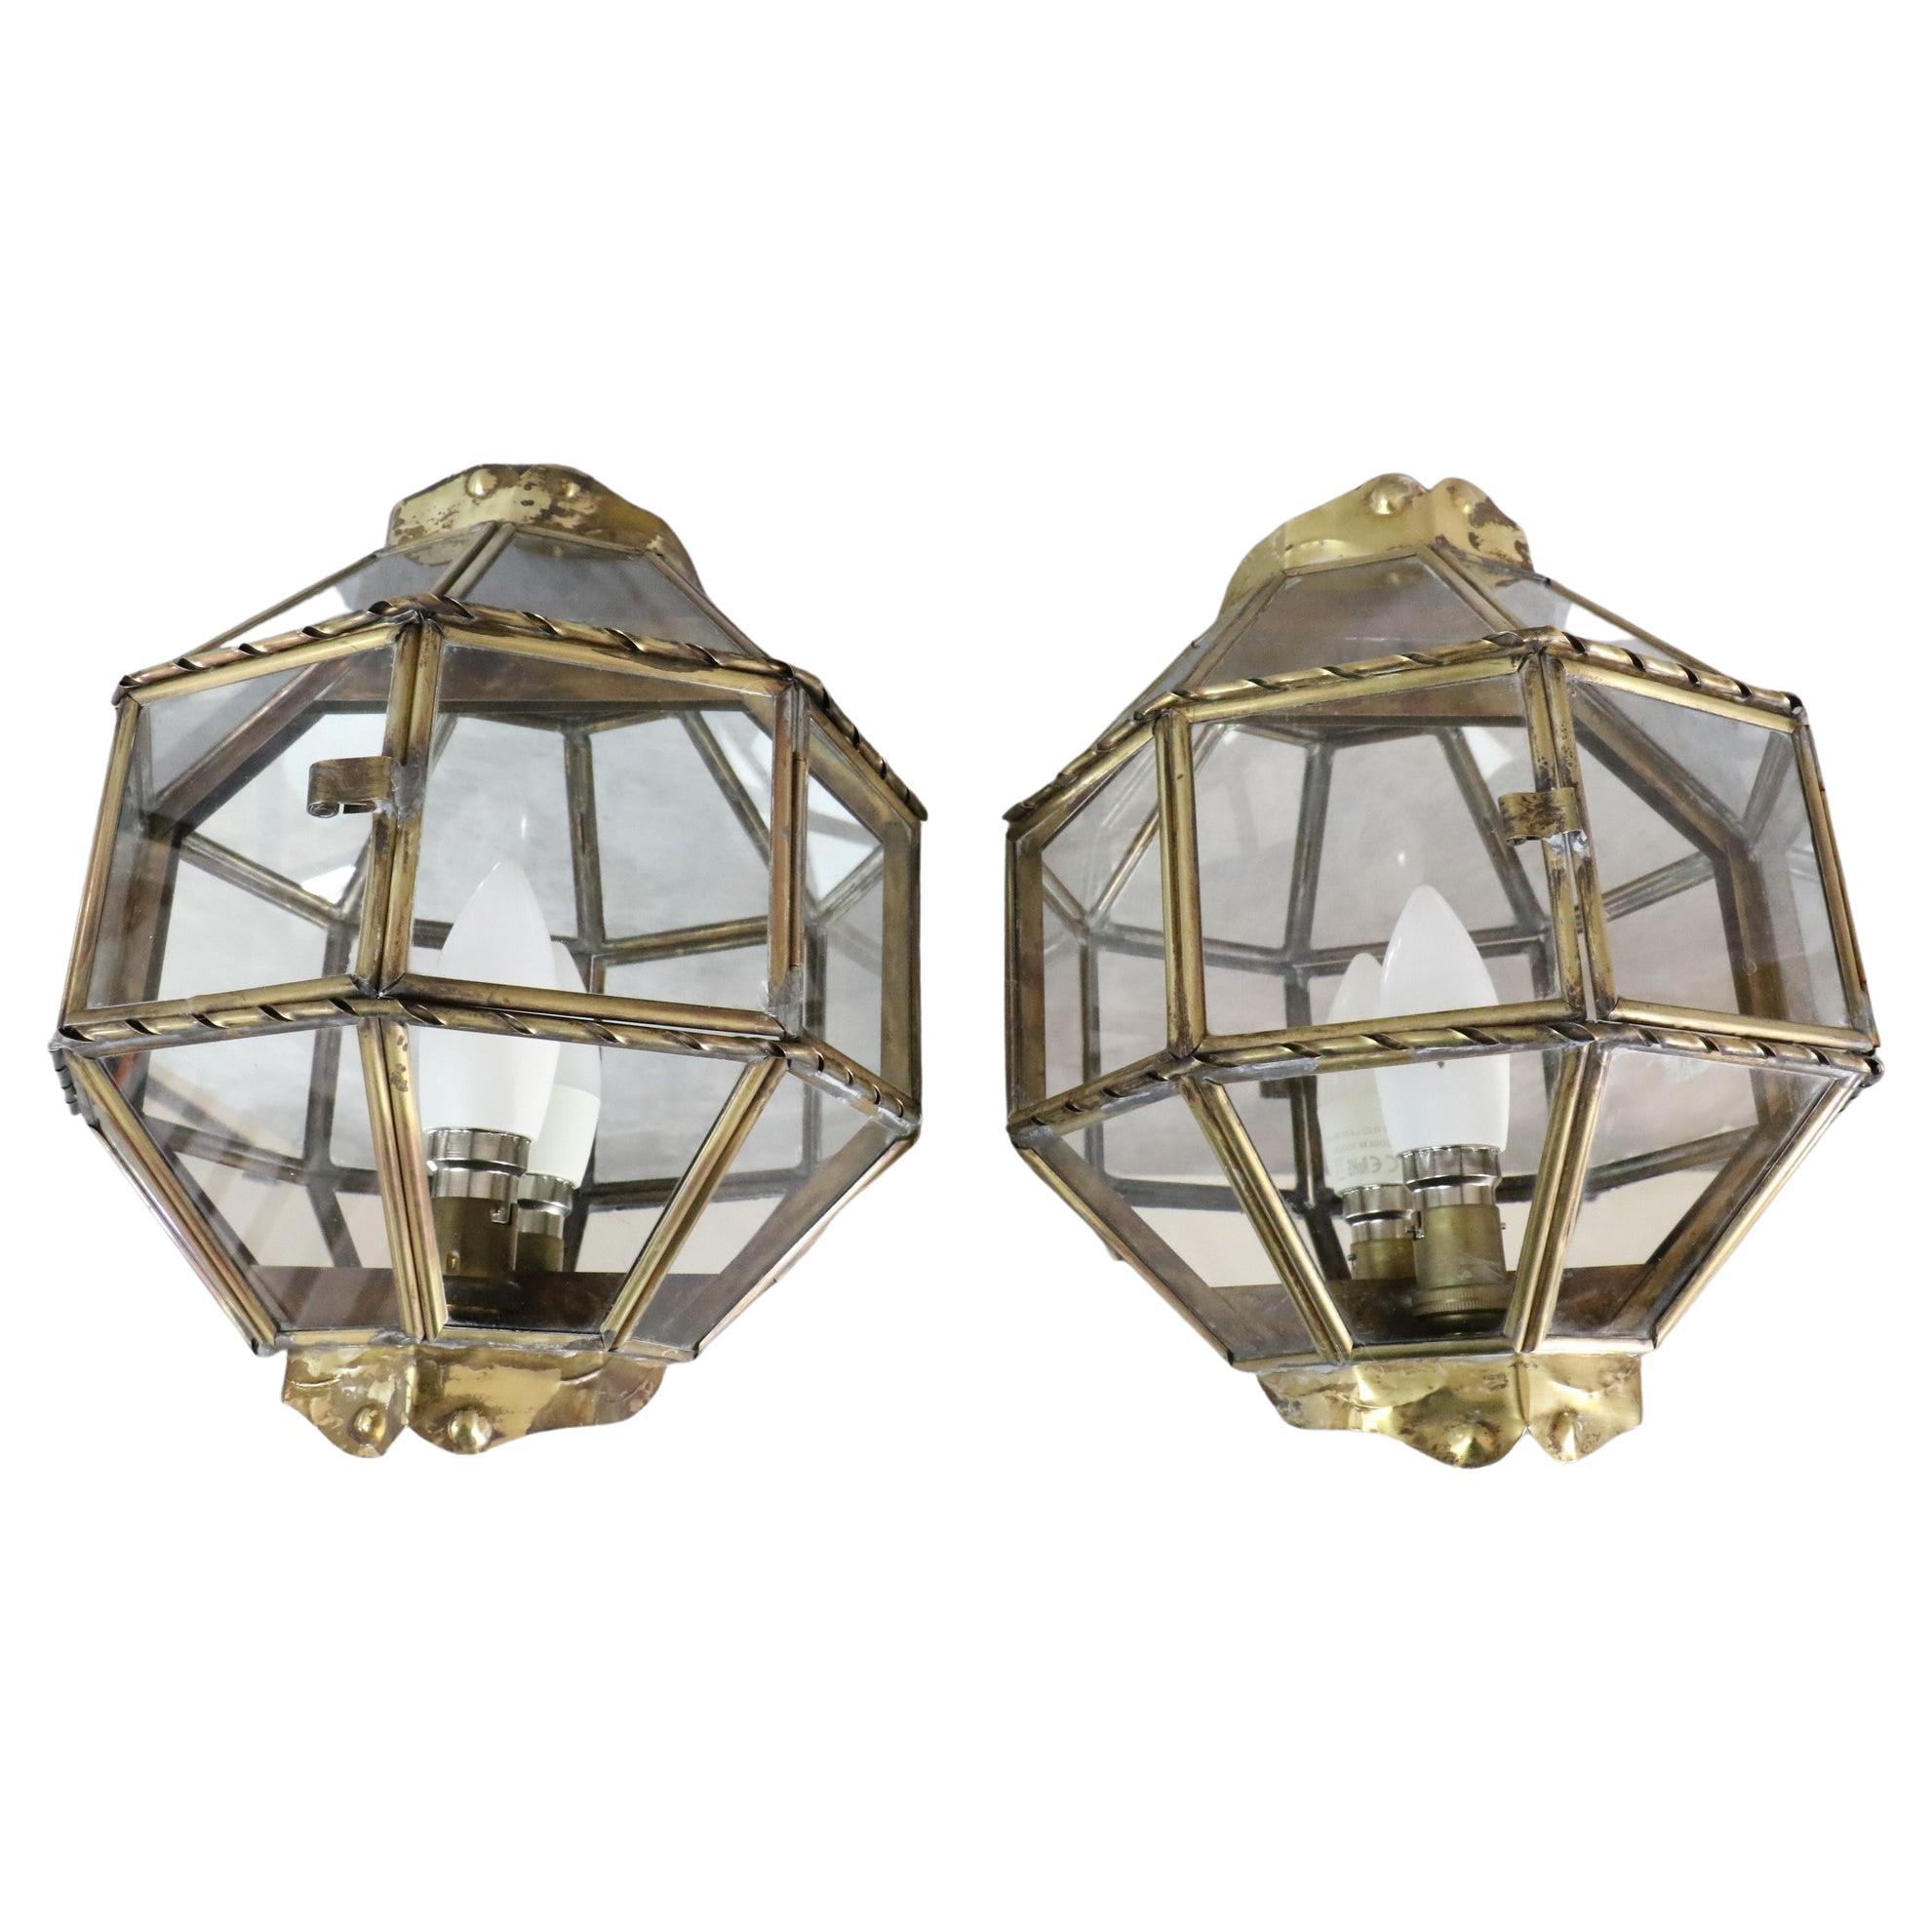 Brass and glass pair of vintage handcrafted wall lamps - 1940s, France

Beautiful minimal and geometric design highlighted by sophisticated details like the mirror in the back of the reflector and the twisted brass.

These beautiful sconces are